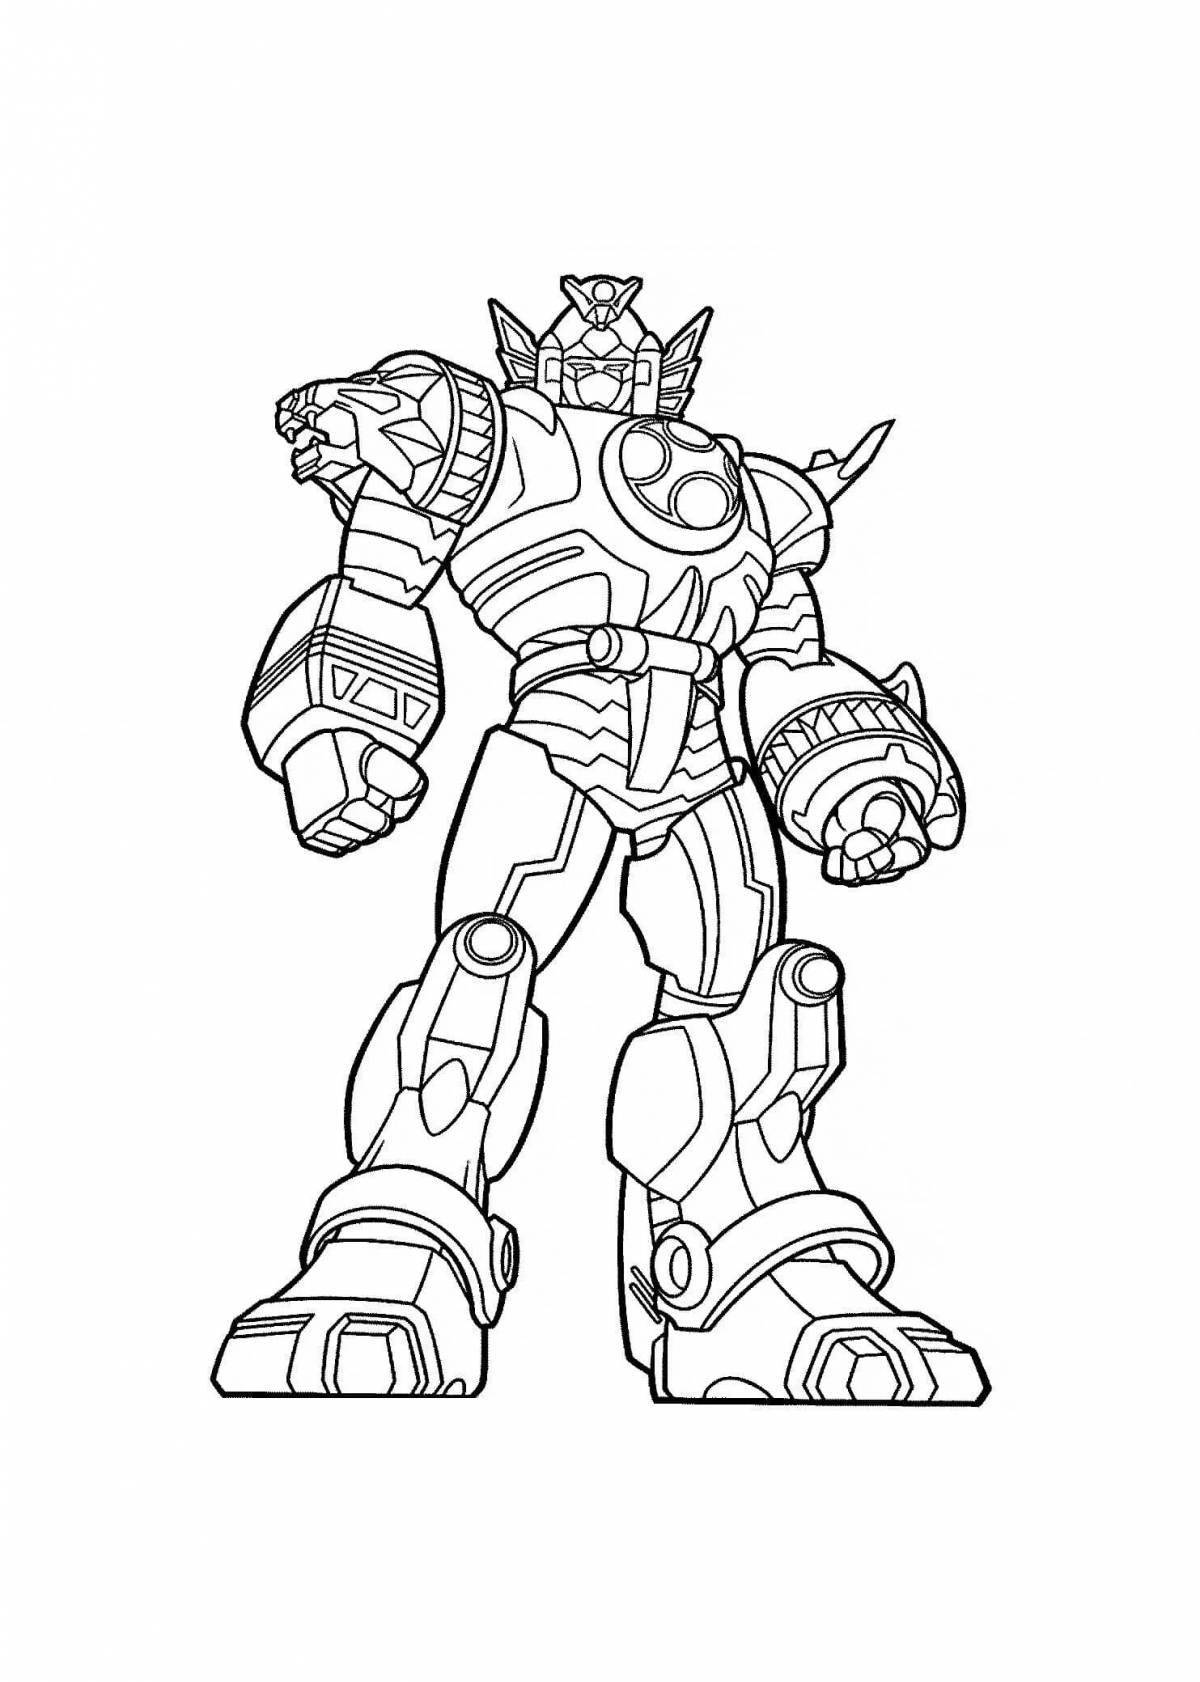 Funny transforming robot coloring page for kids